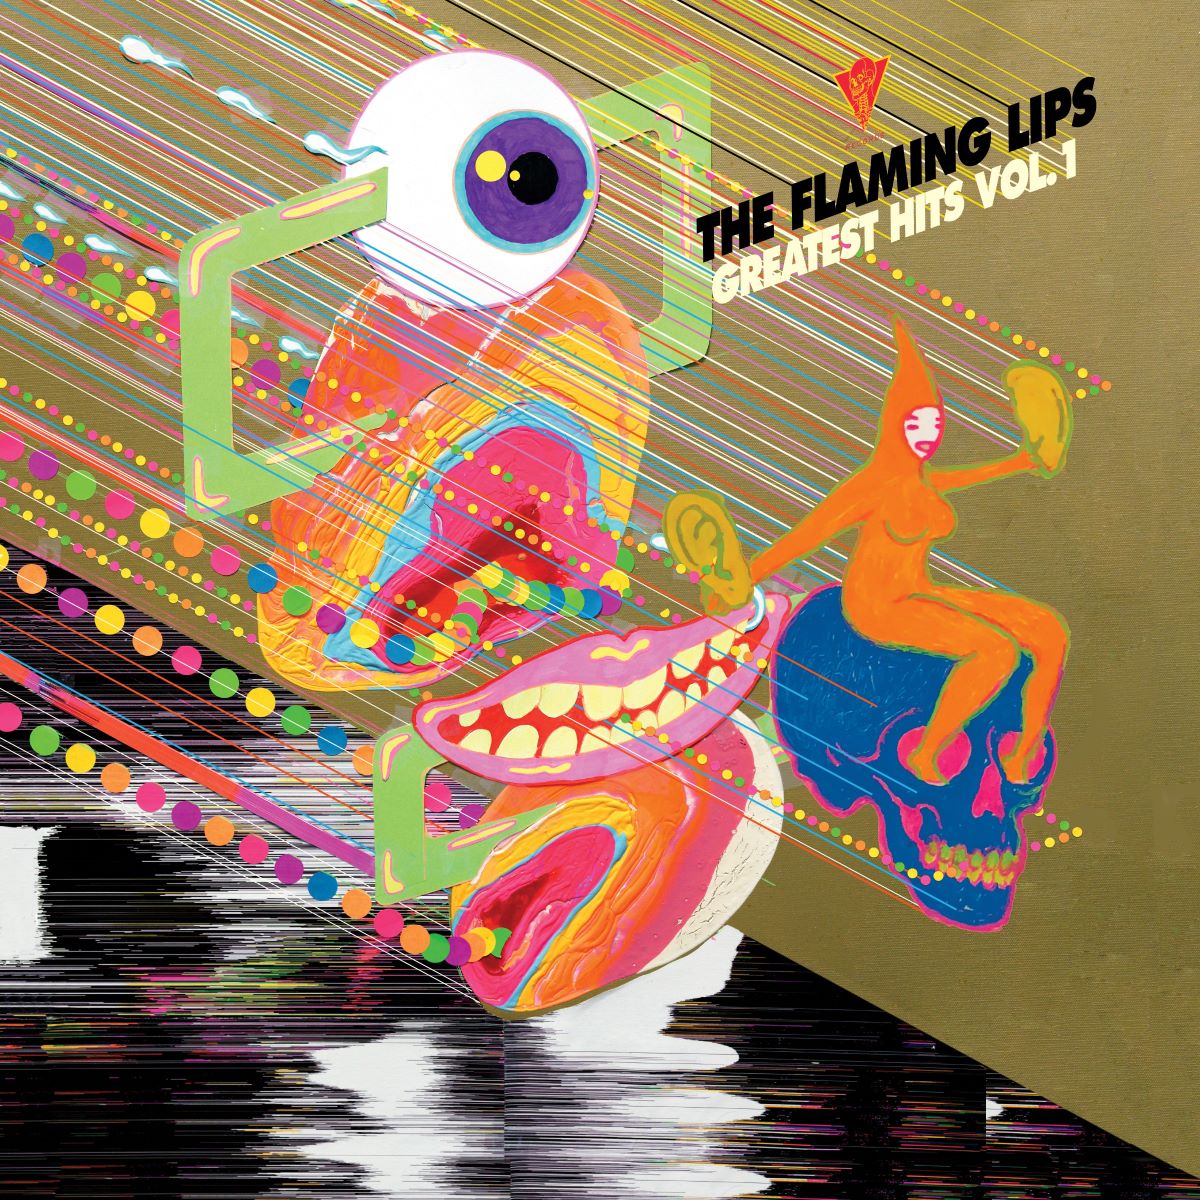 The Flaming Lips - Greatest Hits Vol.1